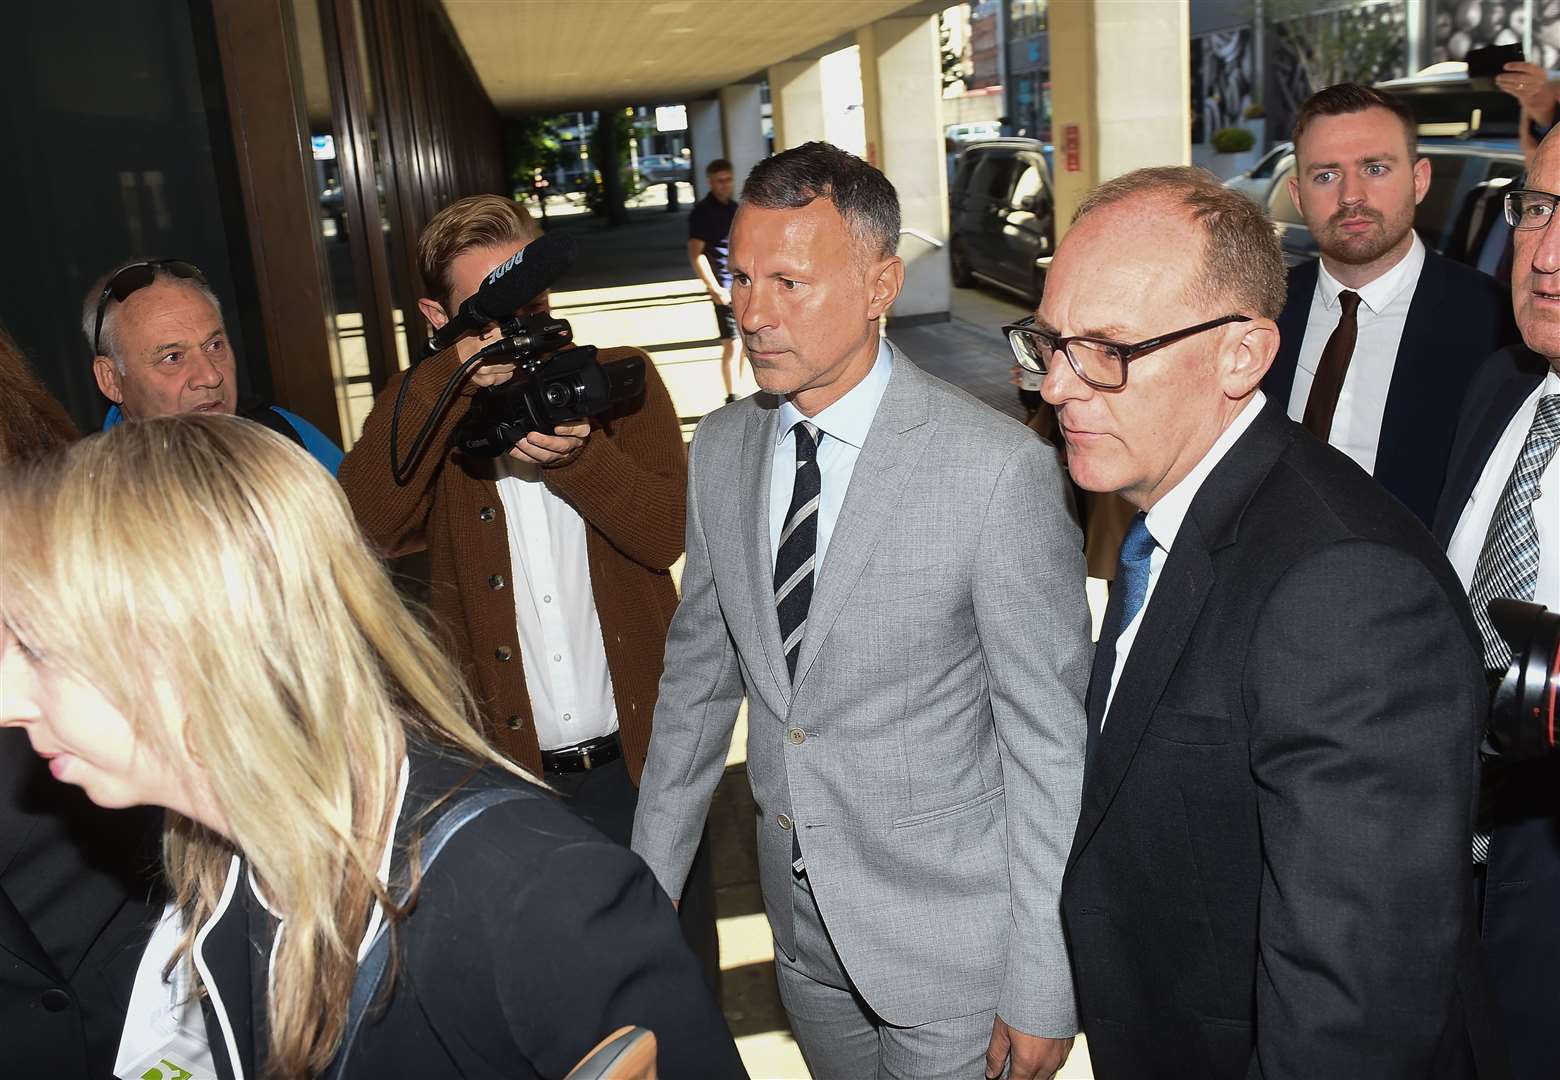 Ryan Giggs arriving at Manchester Crown Court (Peter Powell/PA)